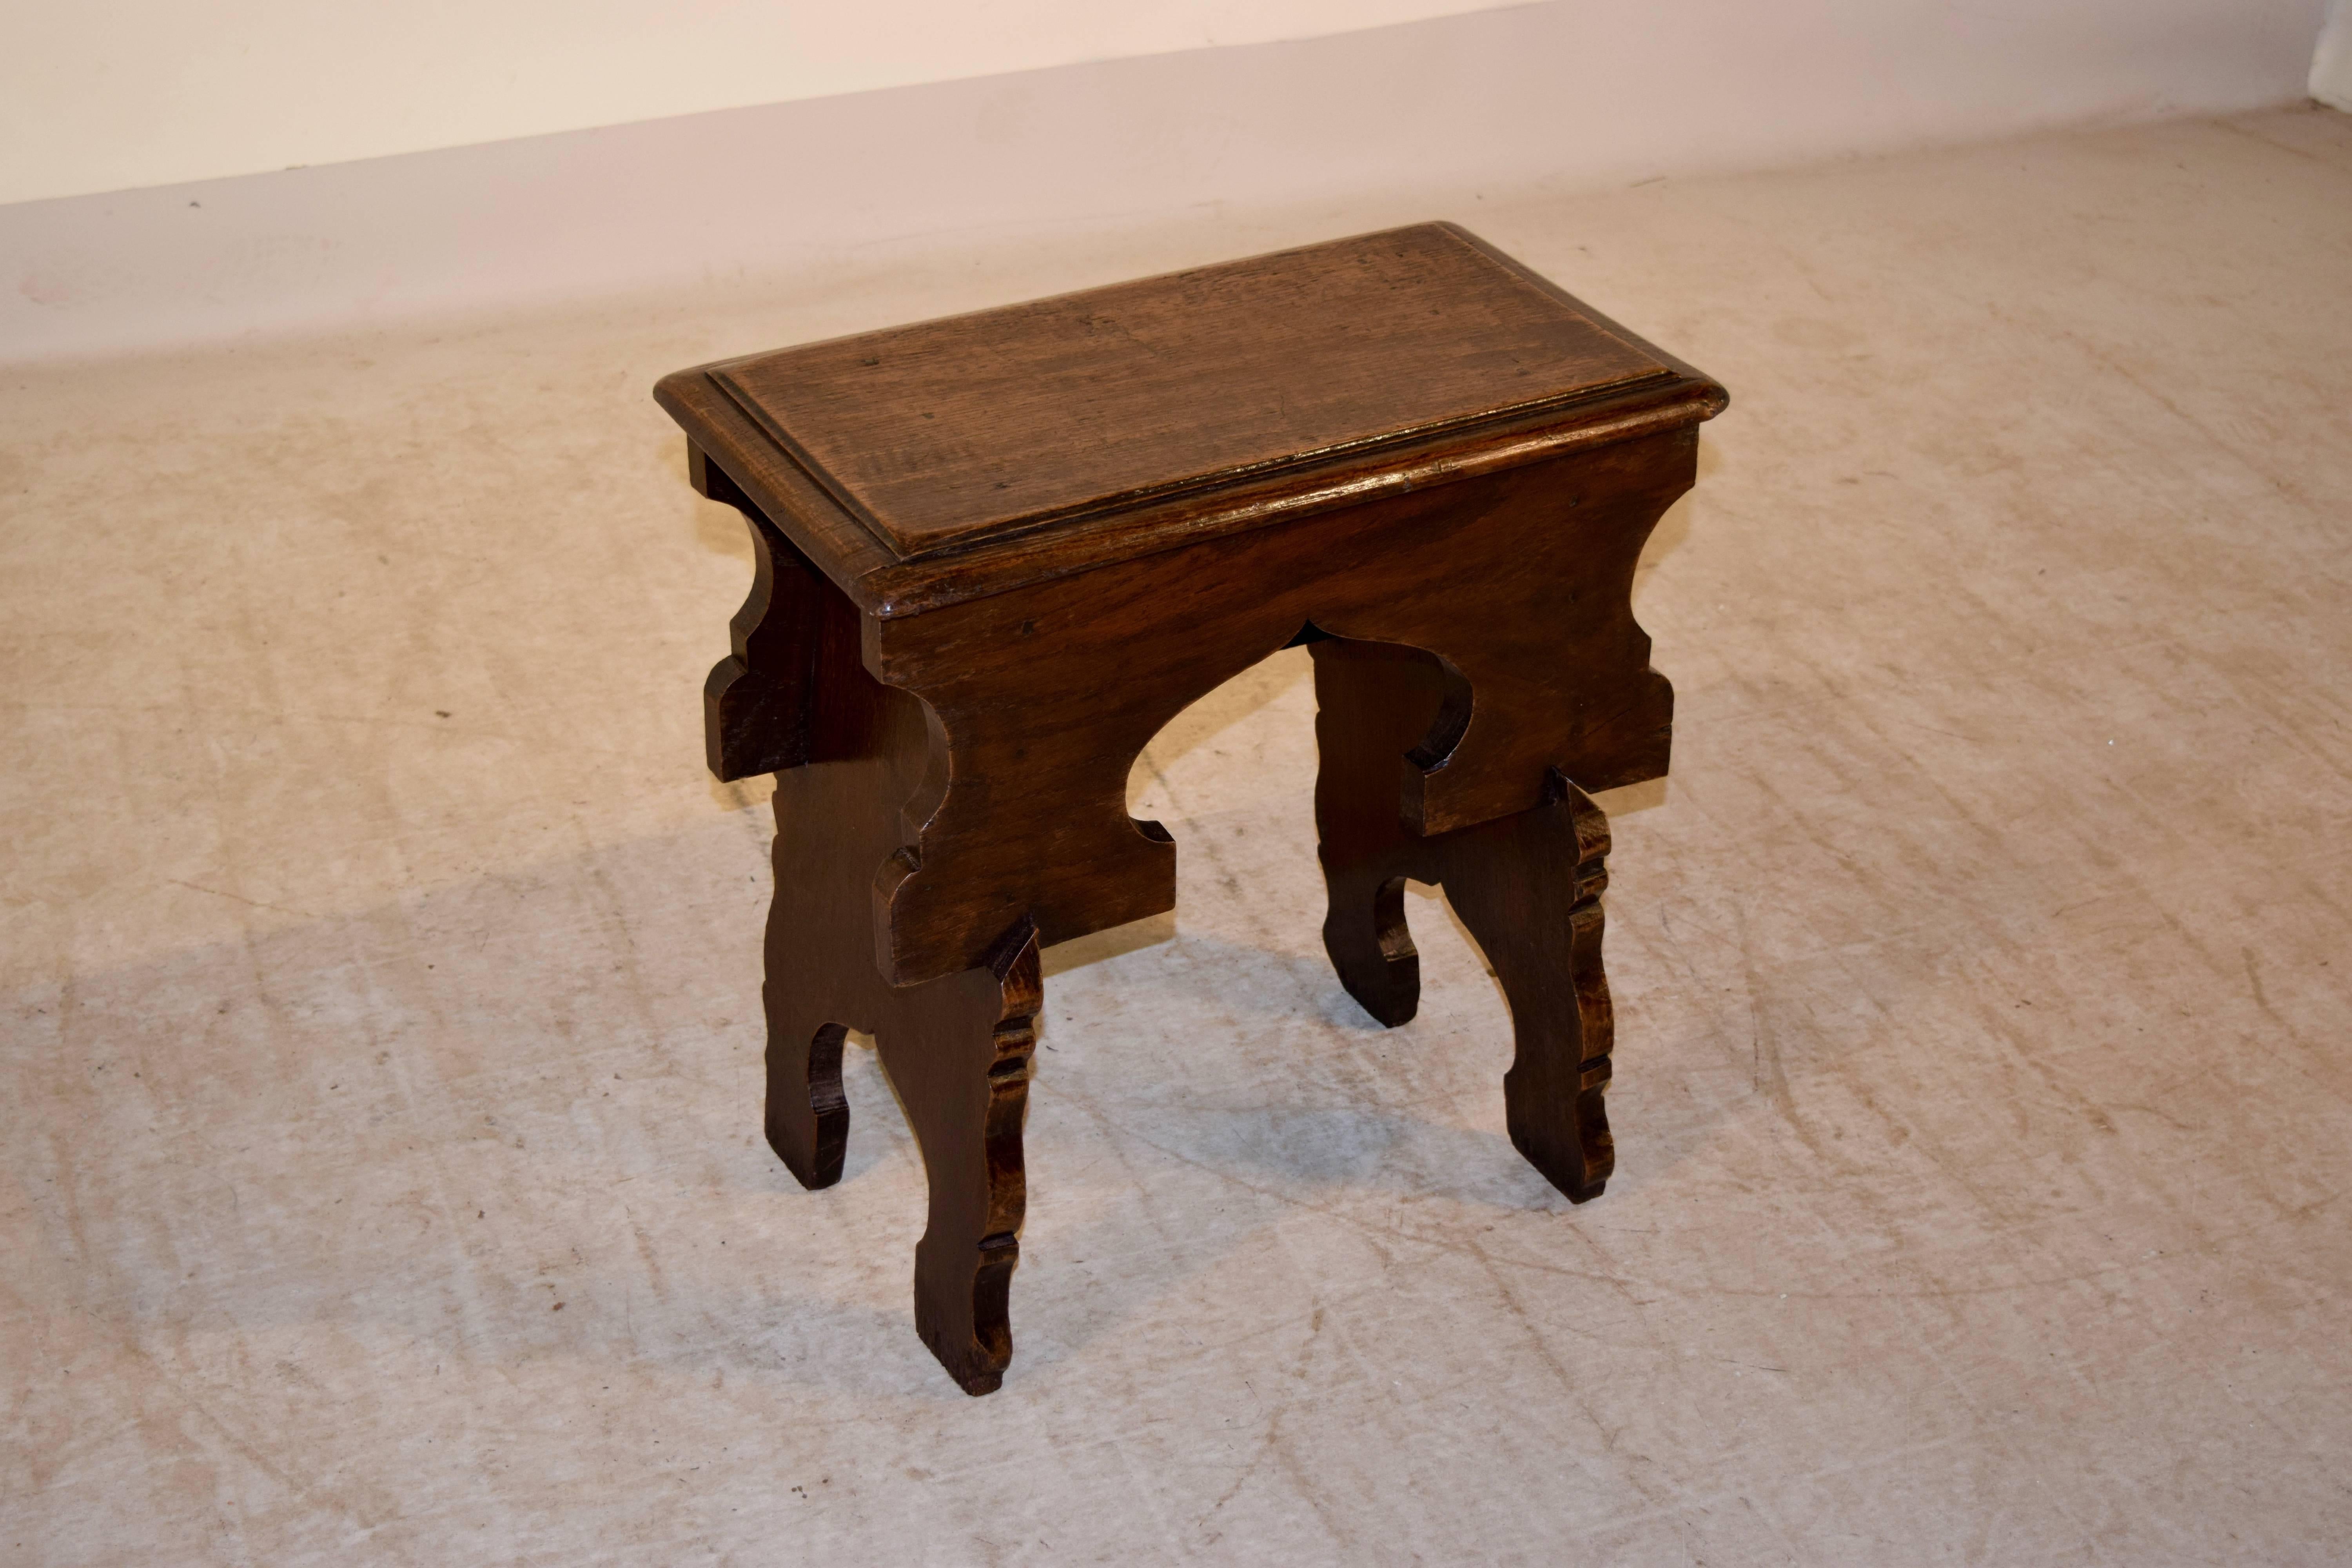 Mid-18th century oak stool from Wales. The top is beveled and follows down to a wide apron, which is shaped and fits into the legs, which have mirrored shapes. This is a very unusual and unique piece.